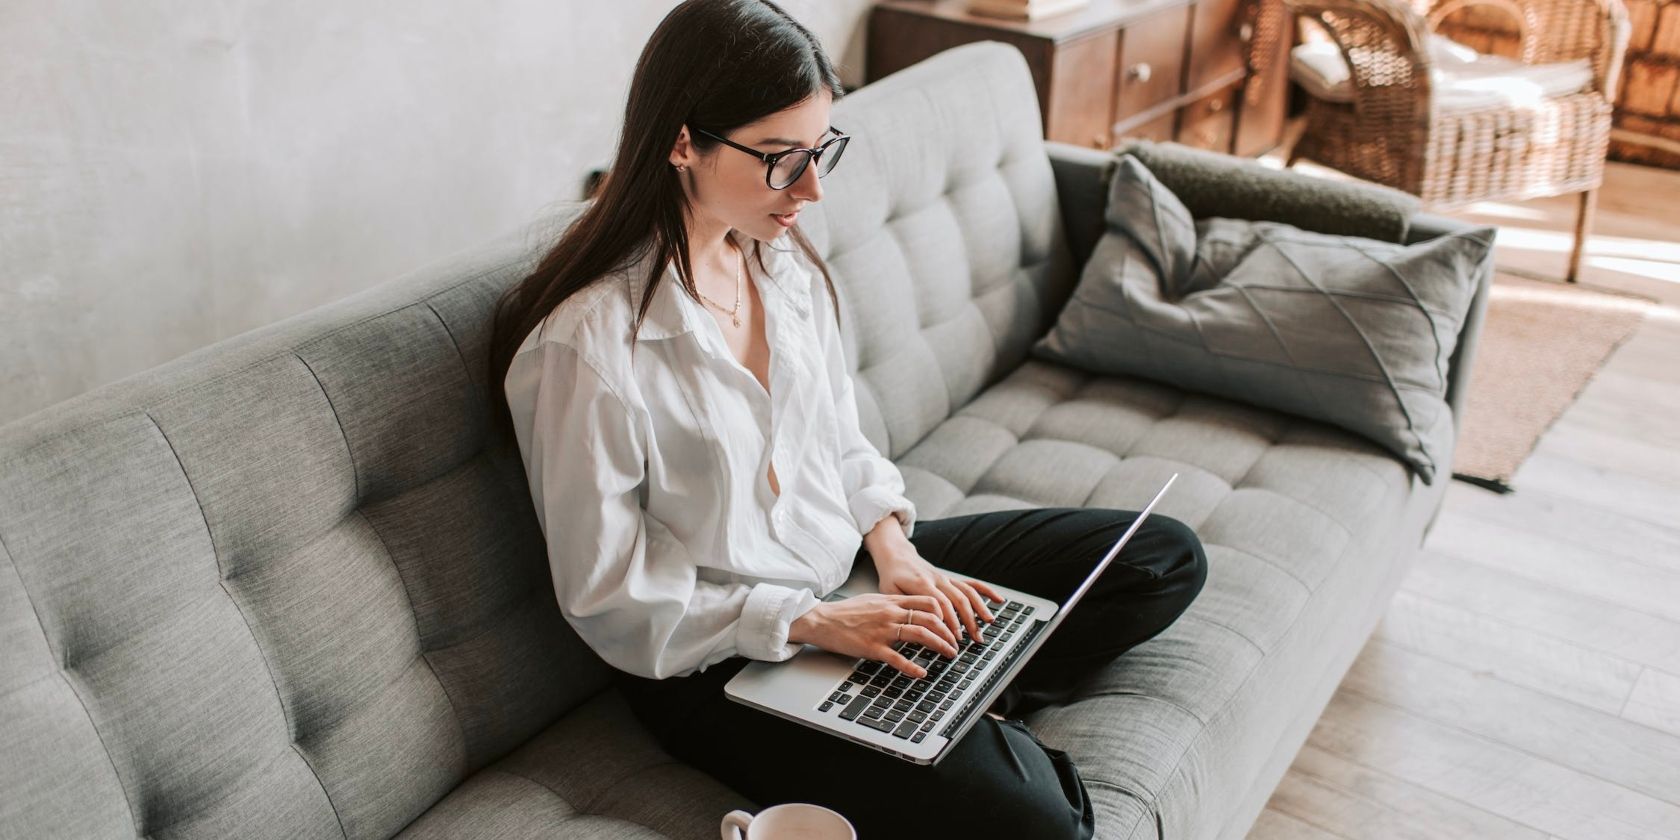 A bespectacled woman typing on a laptop